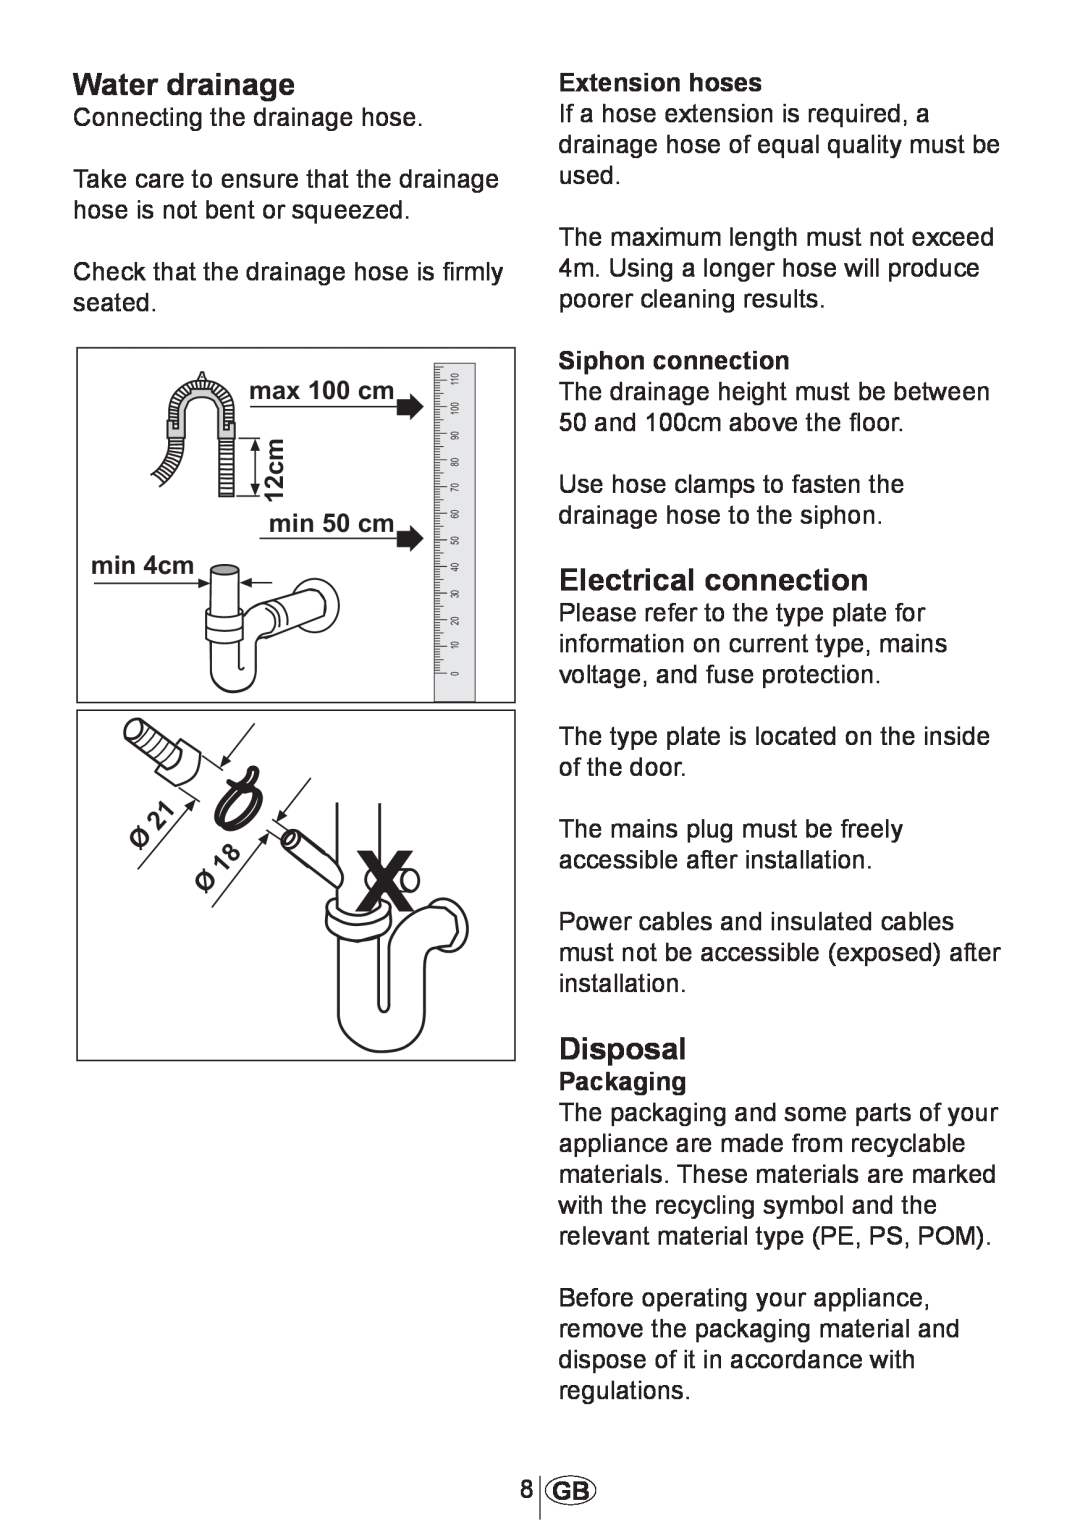 Beko 3905 MI Water drainage, Electrical connection, Disposal, Extension hoses, Siphon connection, Packaging 